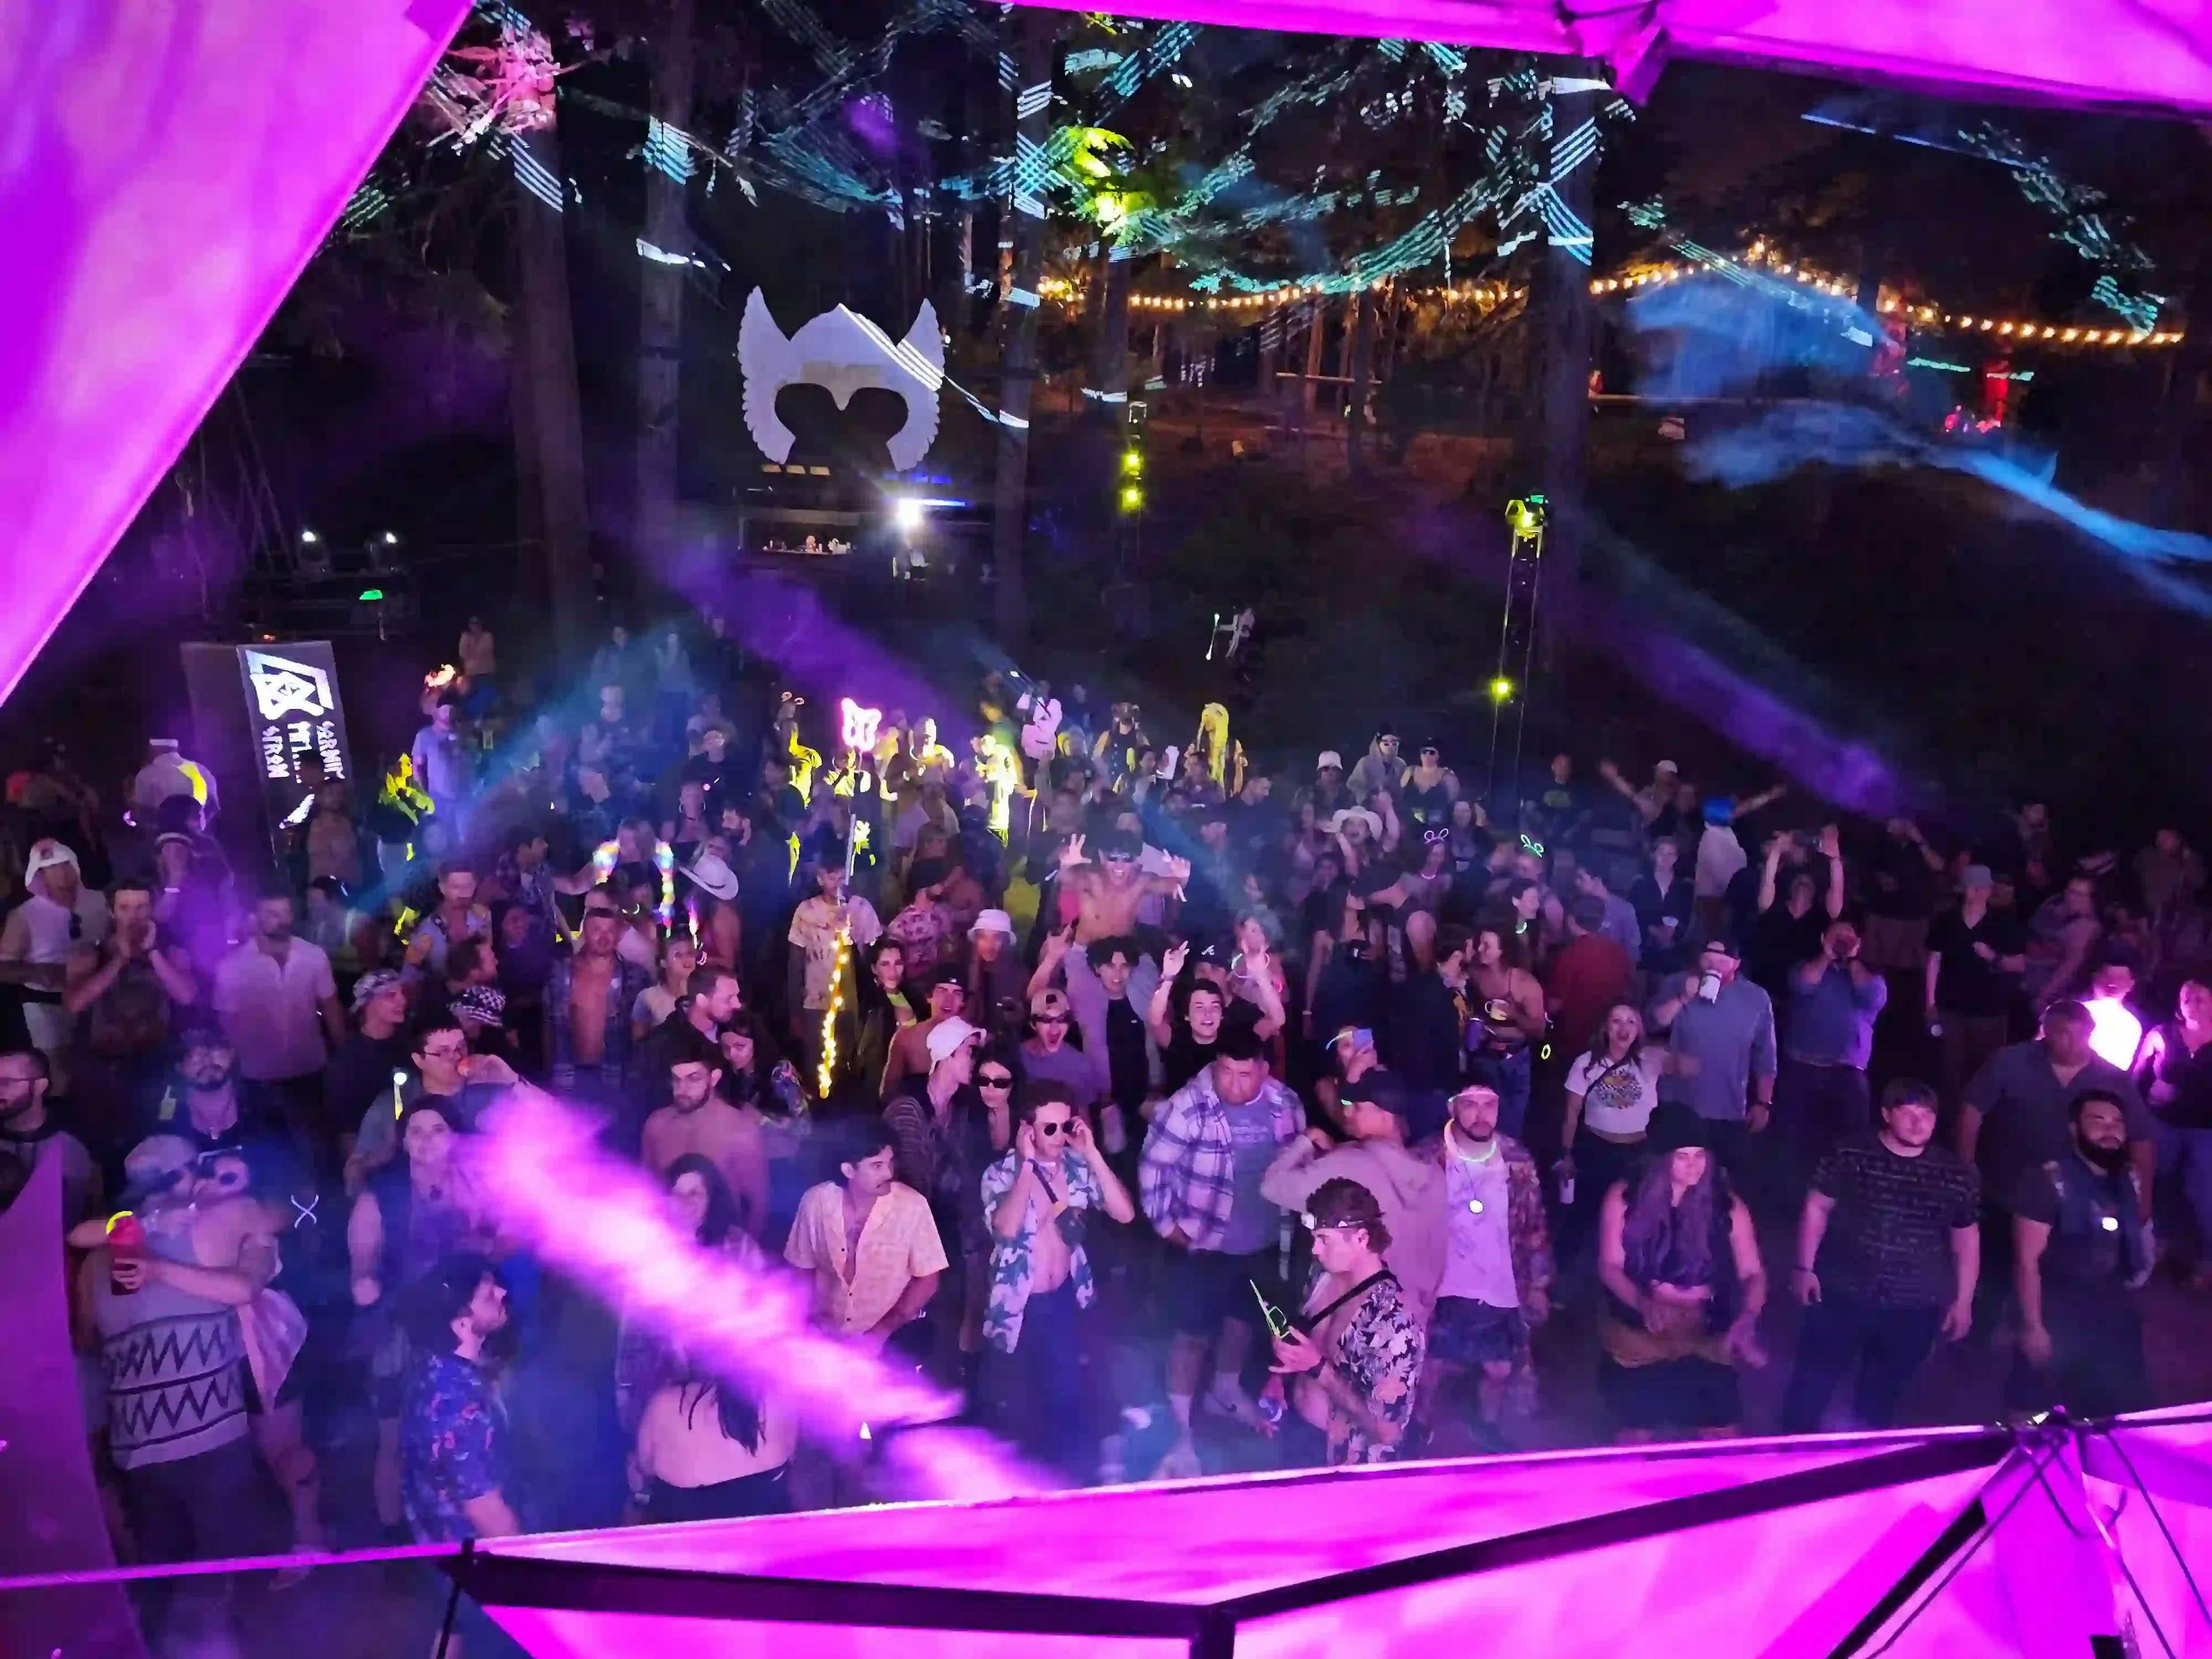 Aerial view of a lively crowd at the Asgard stage with colorful stage lights and festival ambiance.